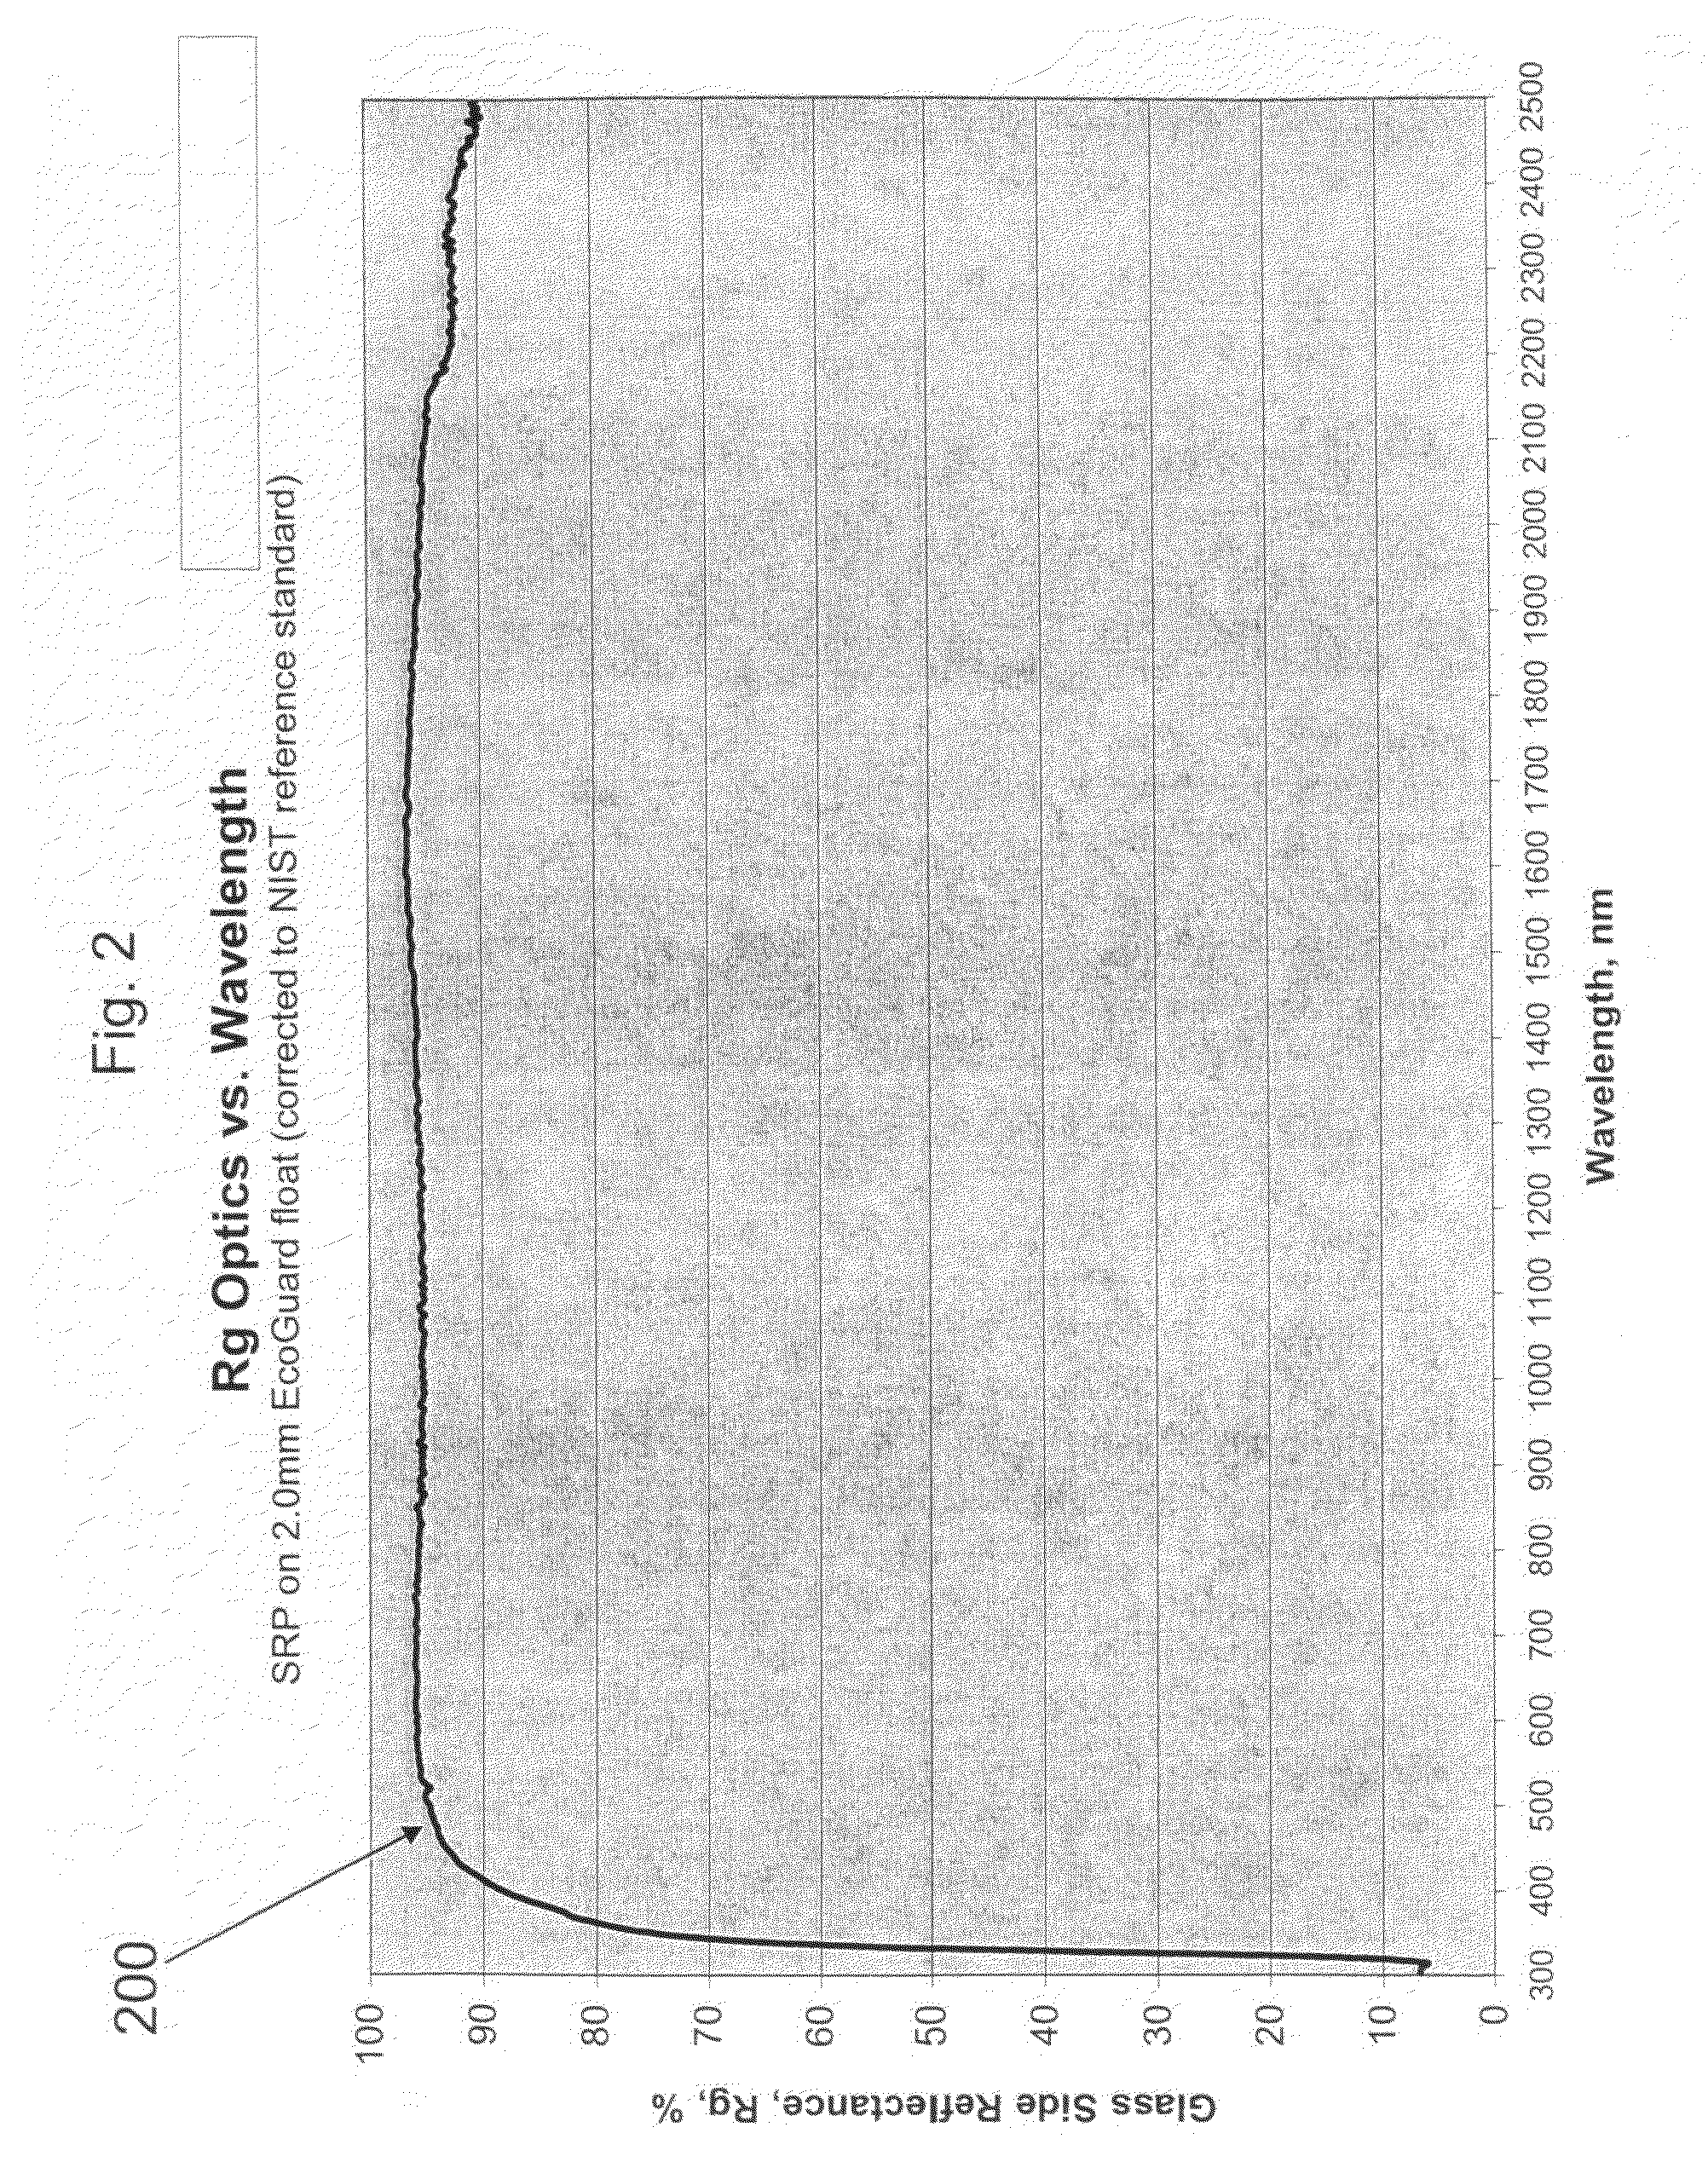 Coated articles with heat treatable coating for concentrated solar power applications, and/or methods of making the same